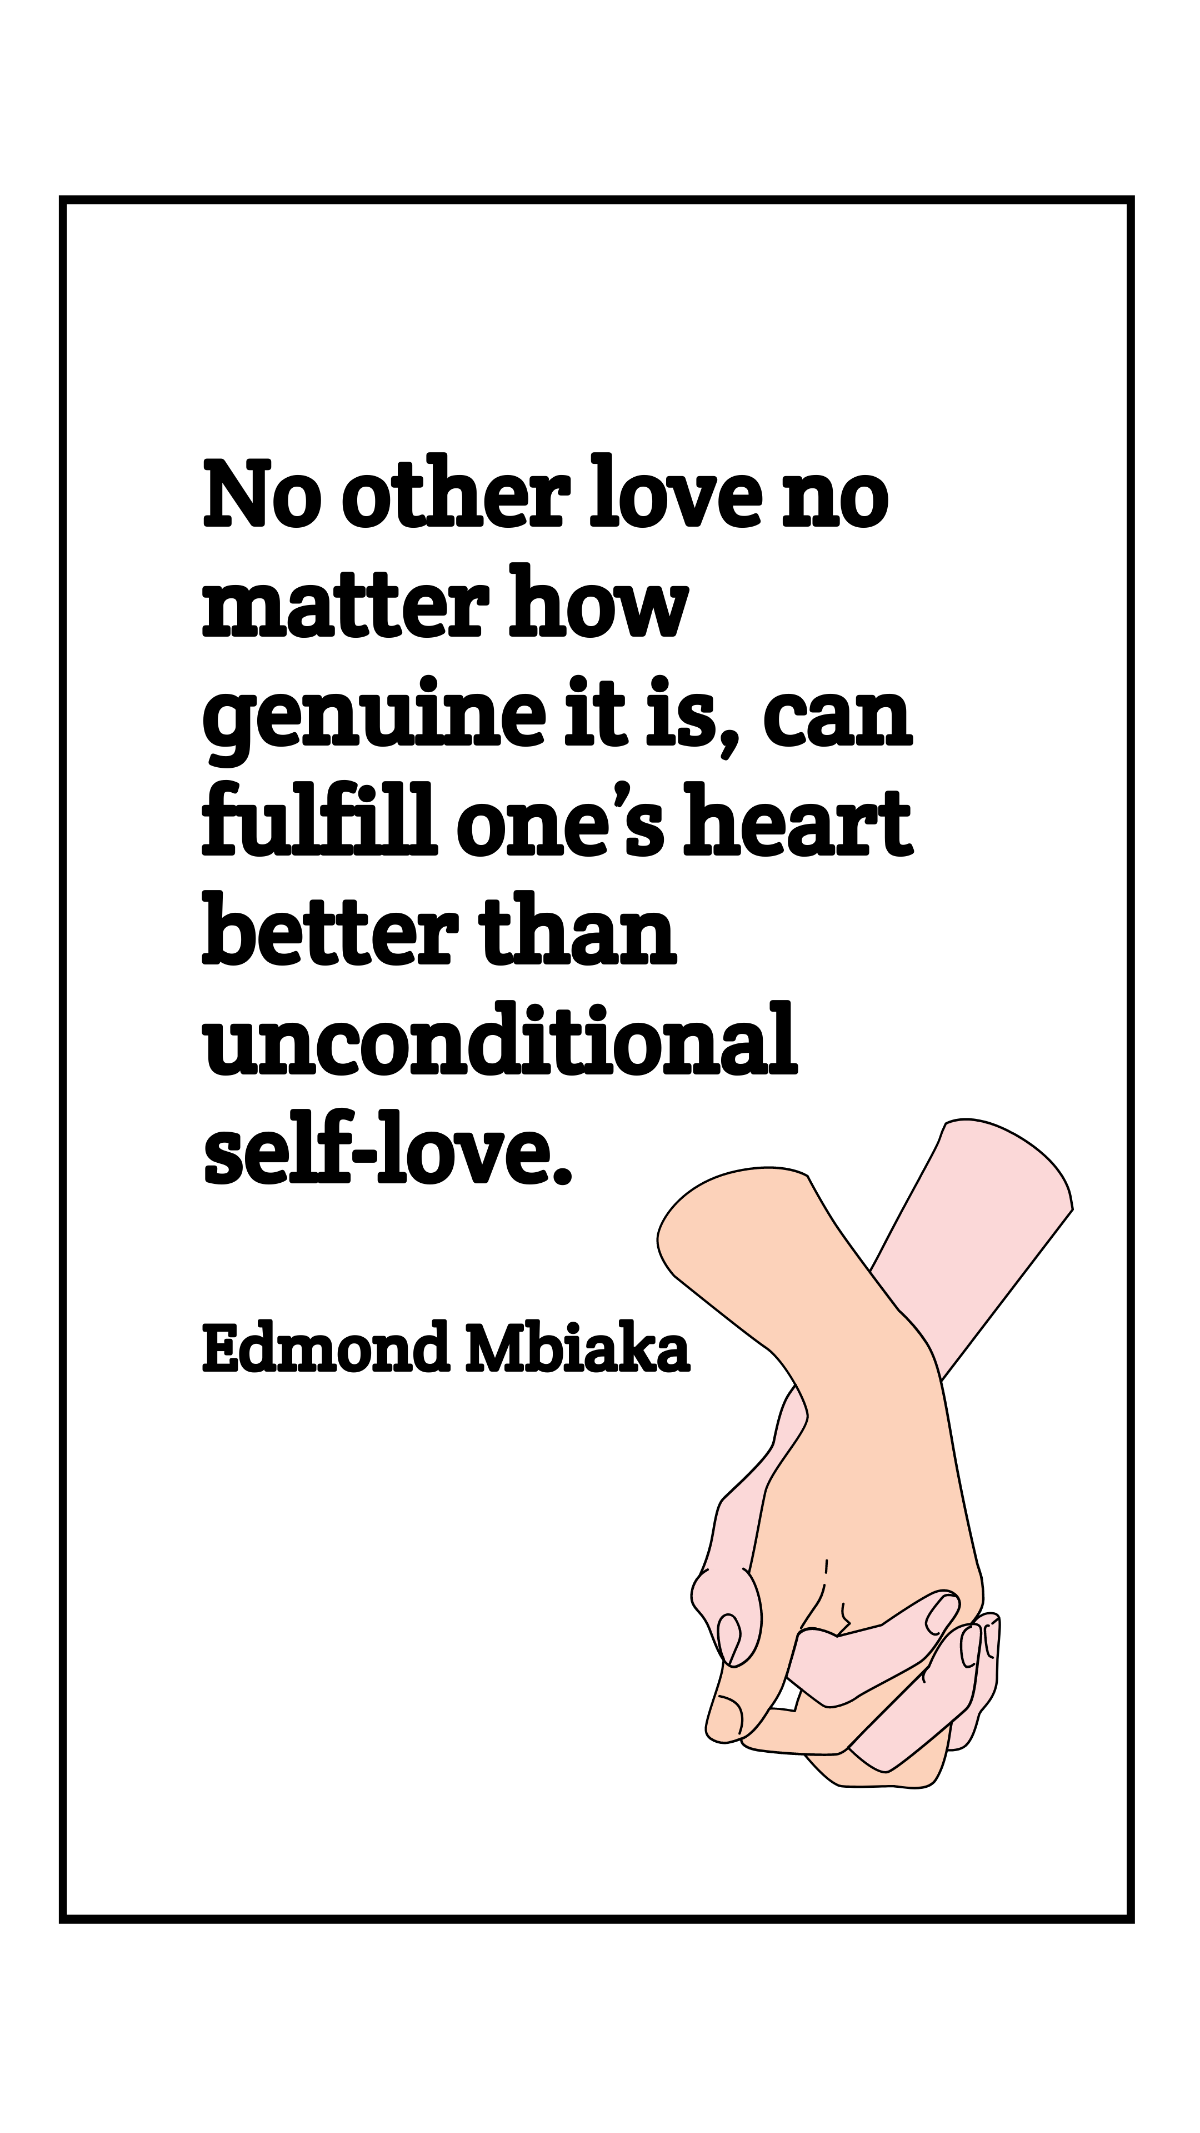 Edmond Mbiaka - No other love no matter how genuine it is, can fulfill one’s heart better than unconditional self-love. Template